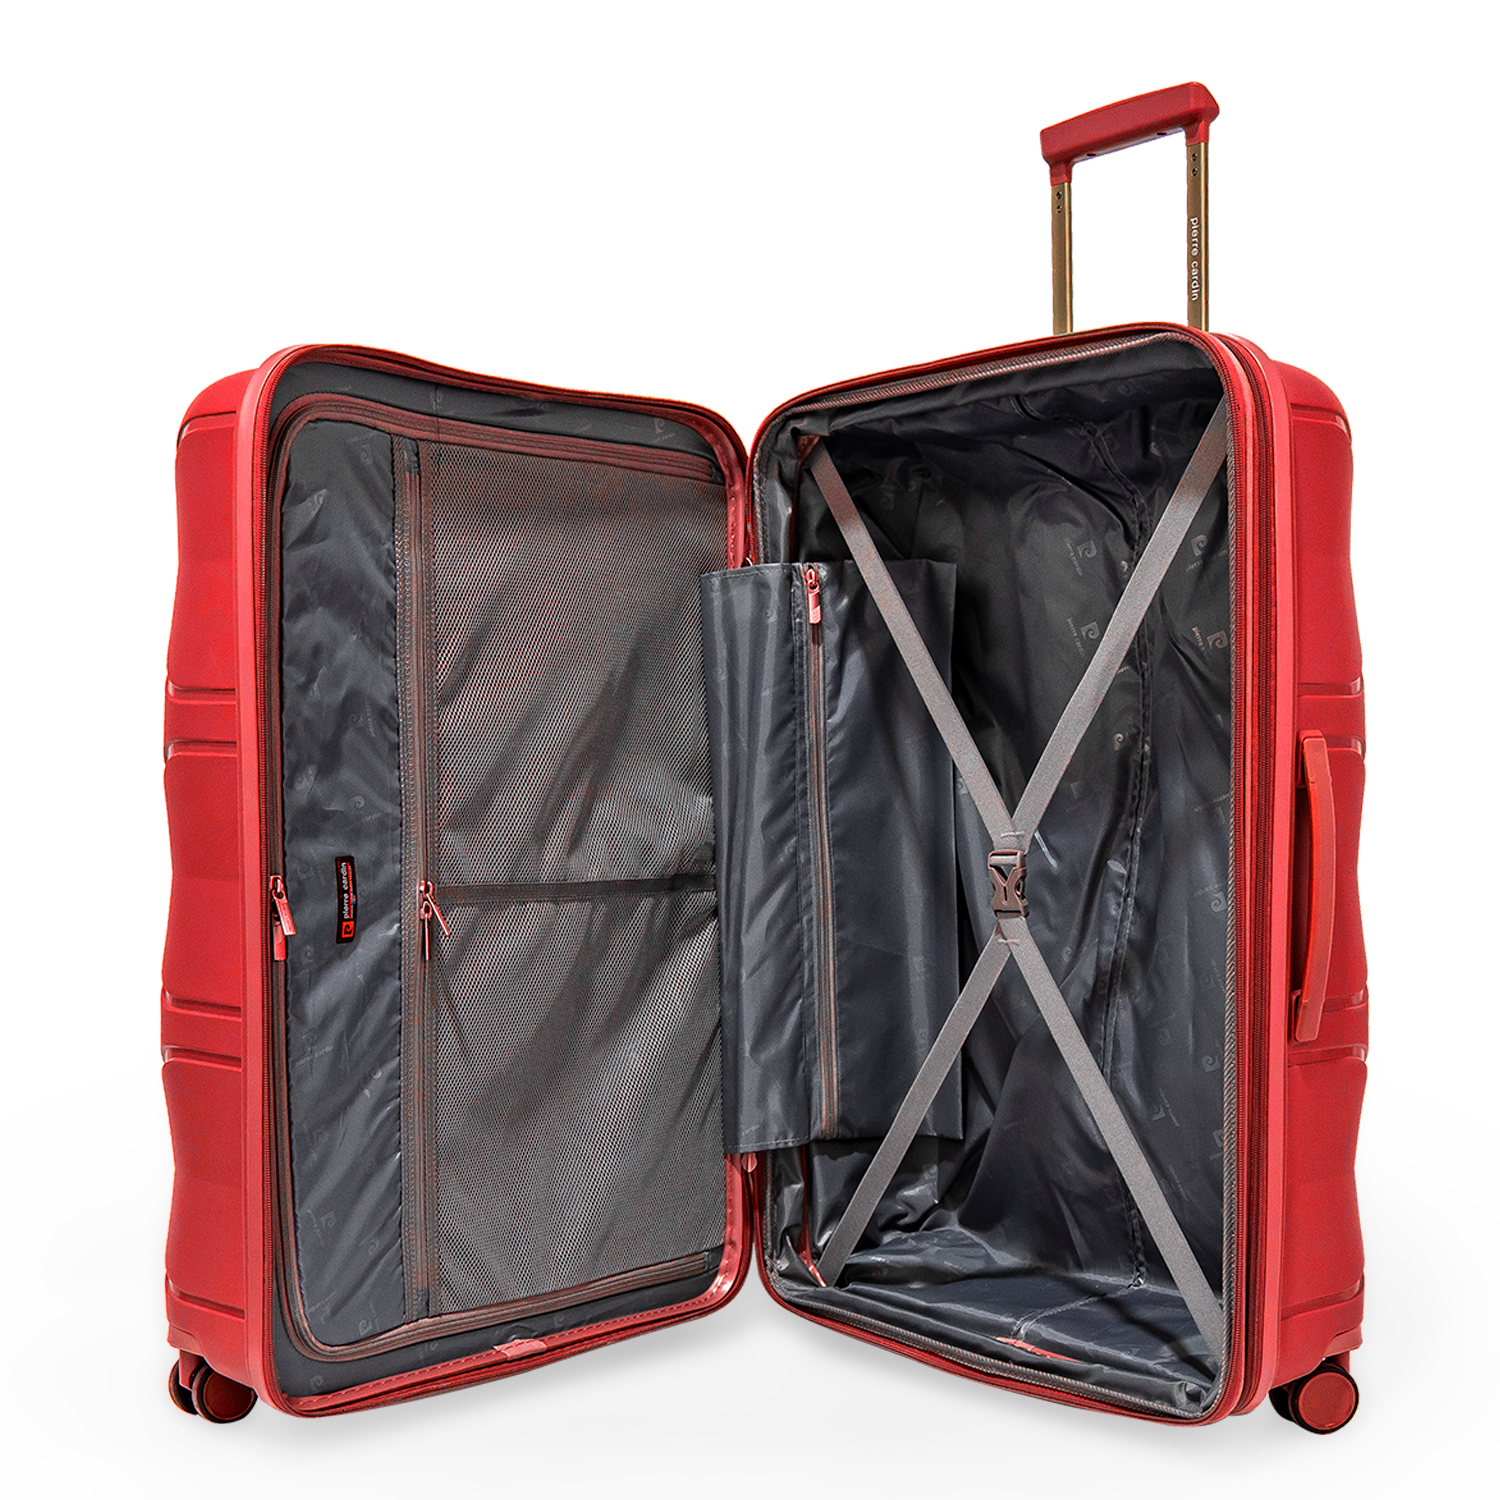 Pierre Cardin Trolley Strong Flexible Suitcases Check-In Red